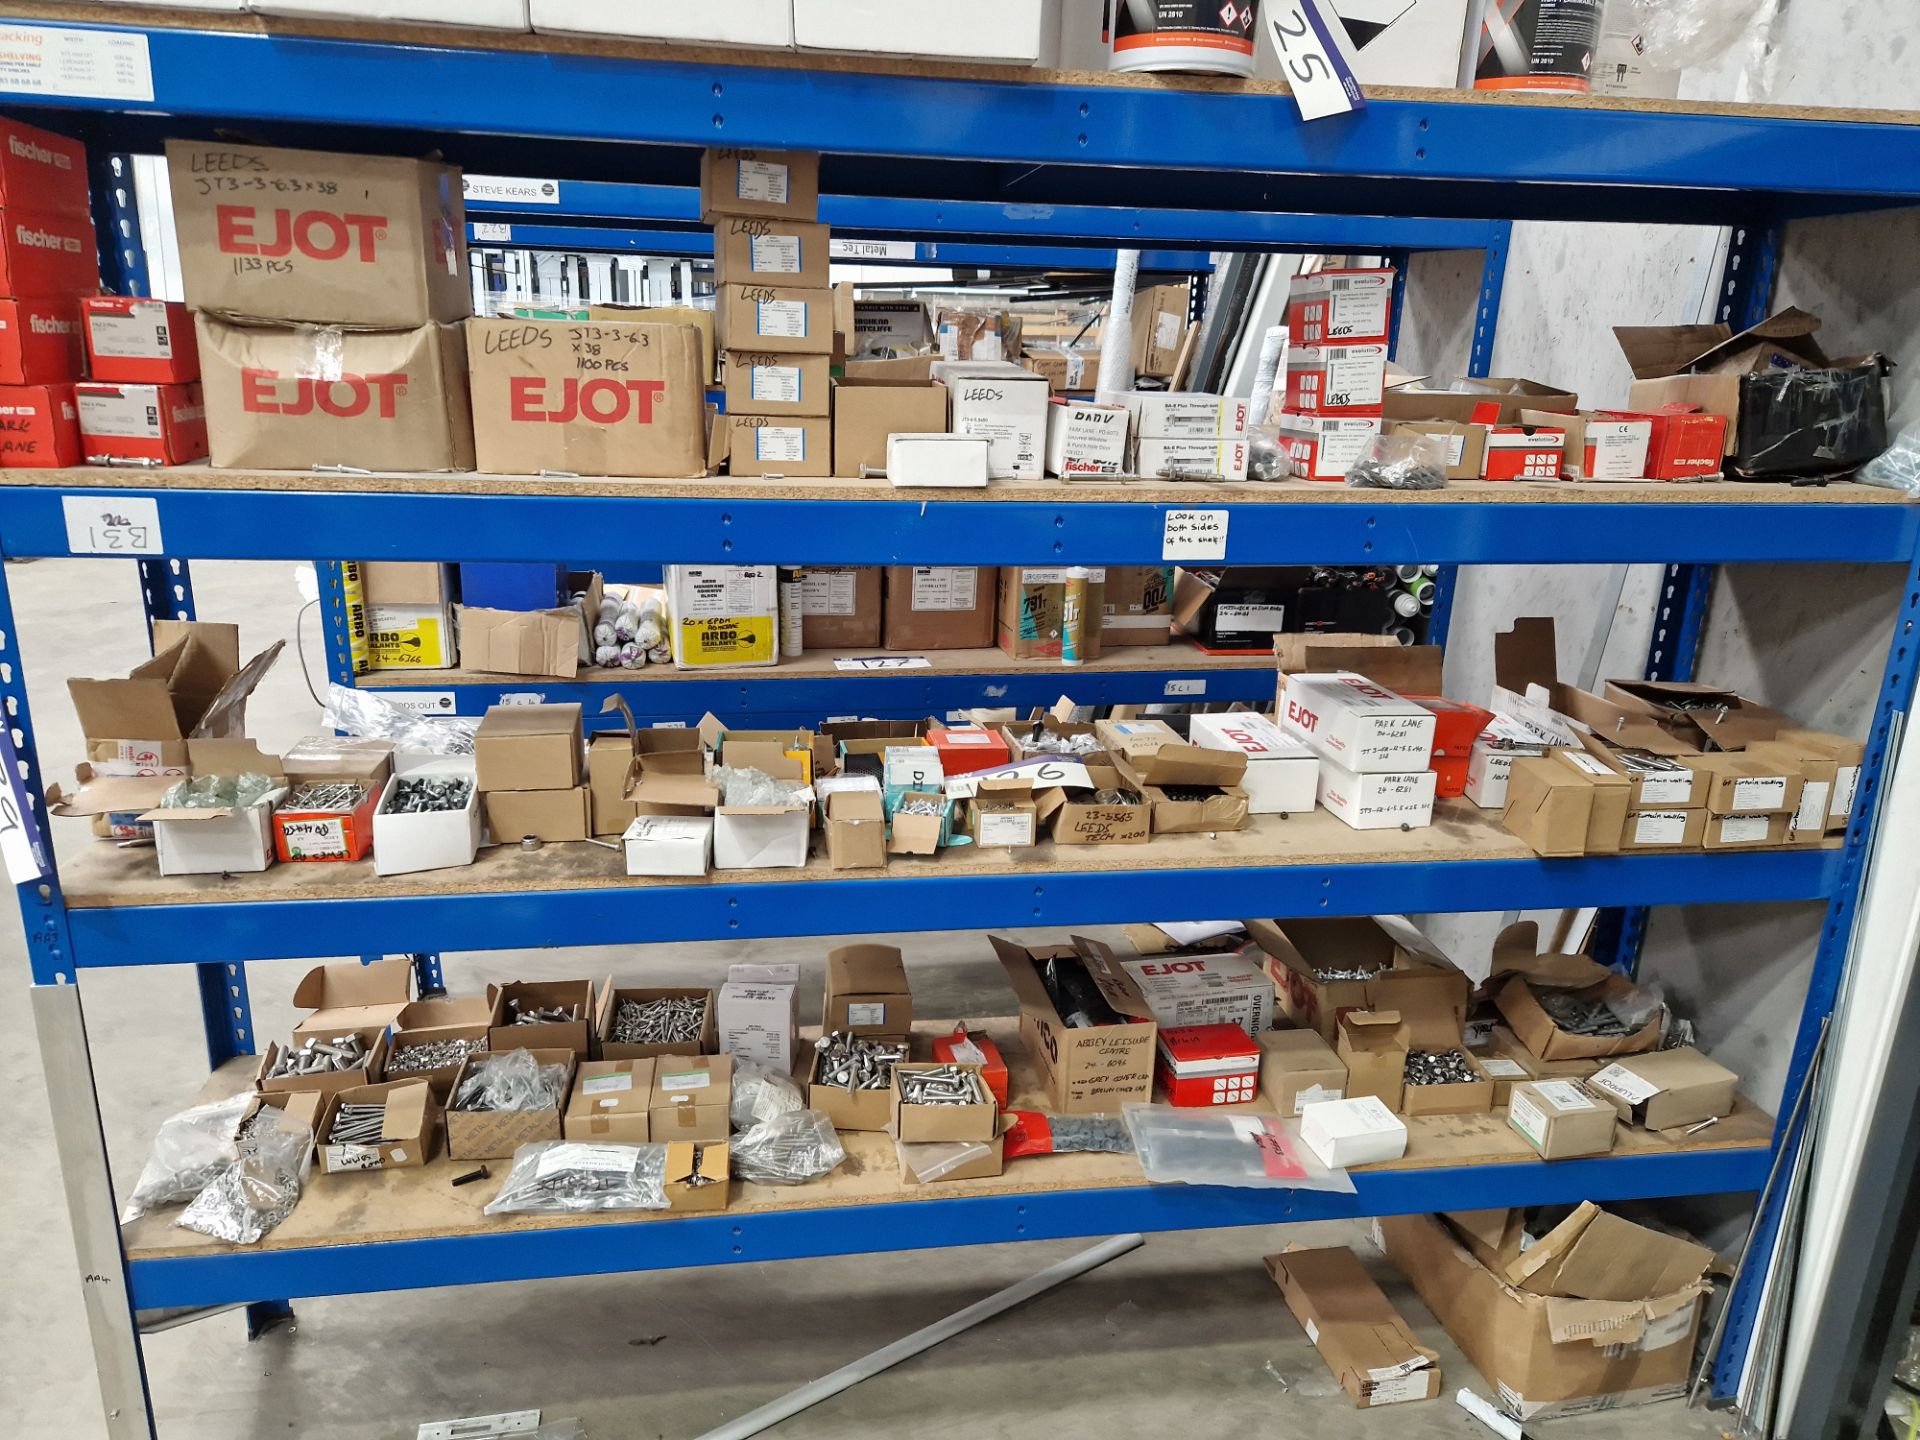 Fixtures and Fittings Contents to One Bay of Racking, including Nuts, Bolts, Rivets, Screws, etc